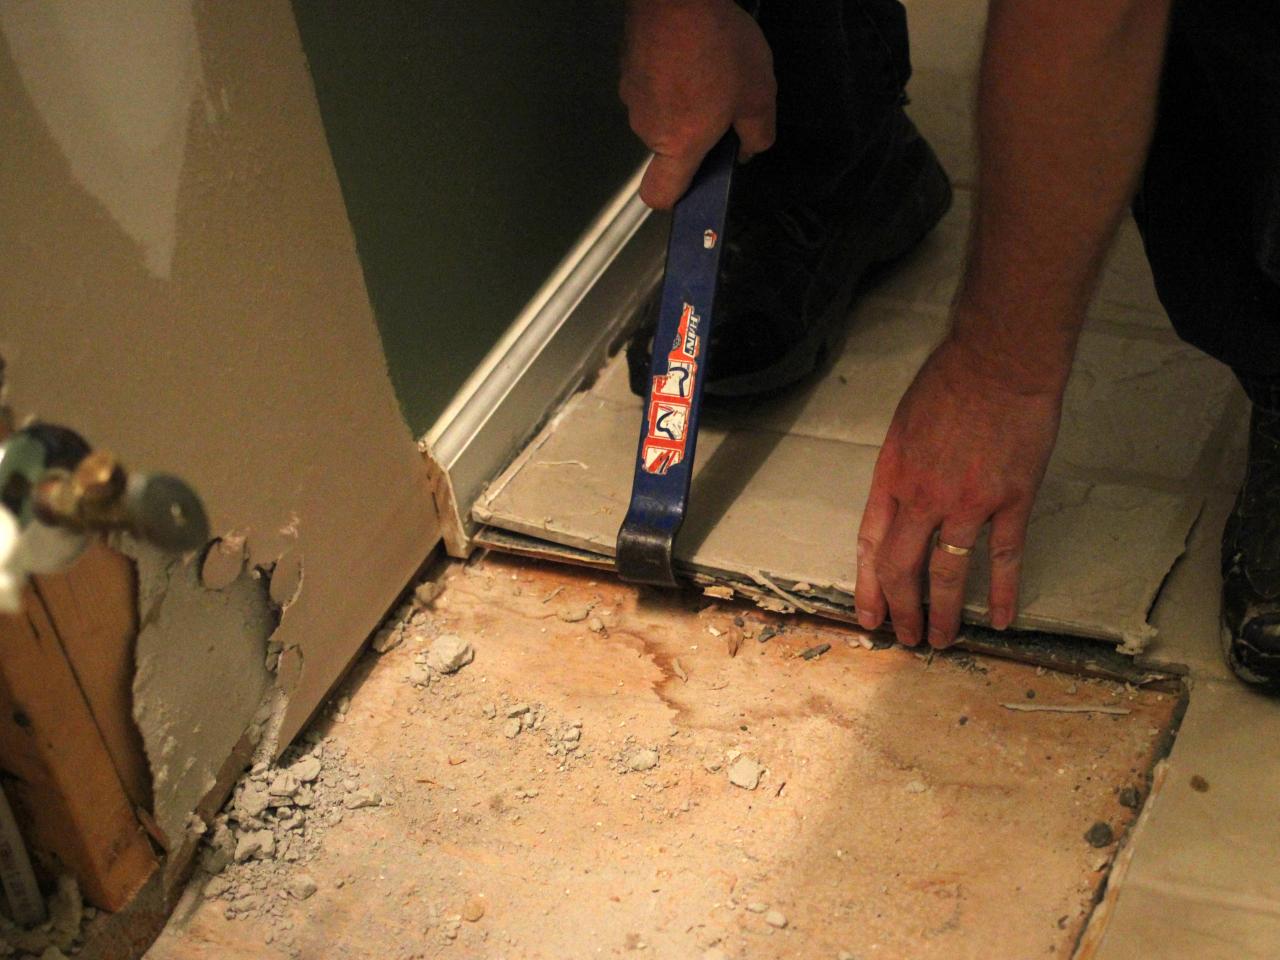 How To Remove A Tile Floor, Best Way To Remove Ceramic Tile From Concrete Floor